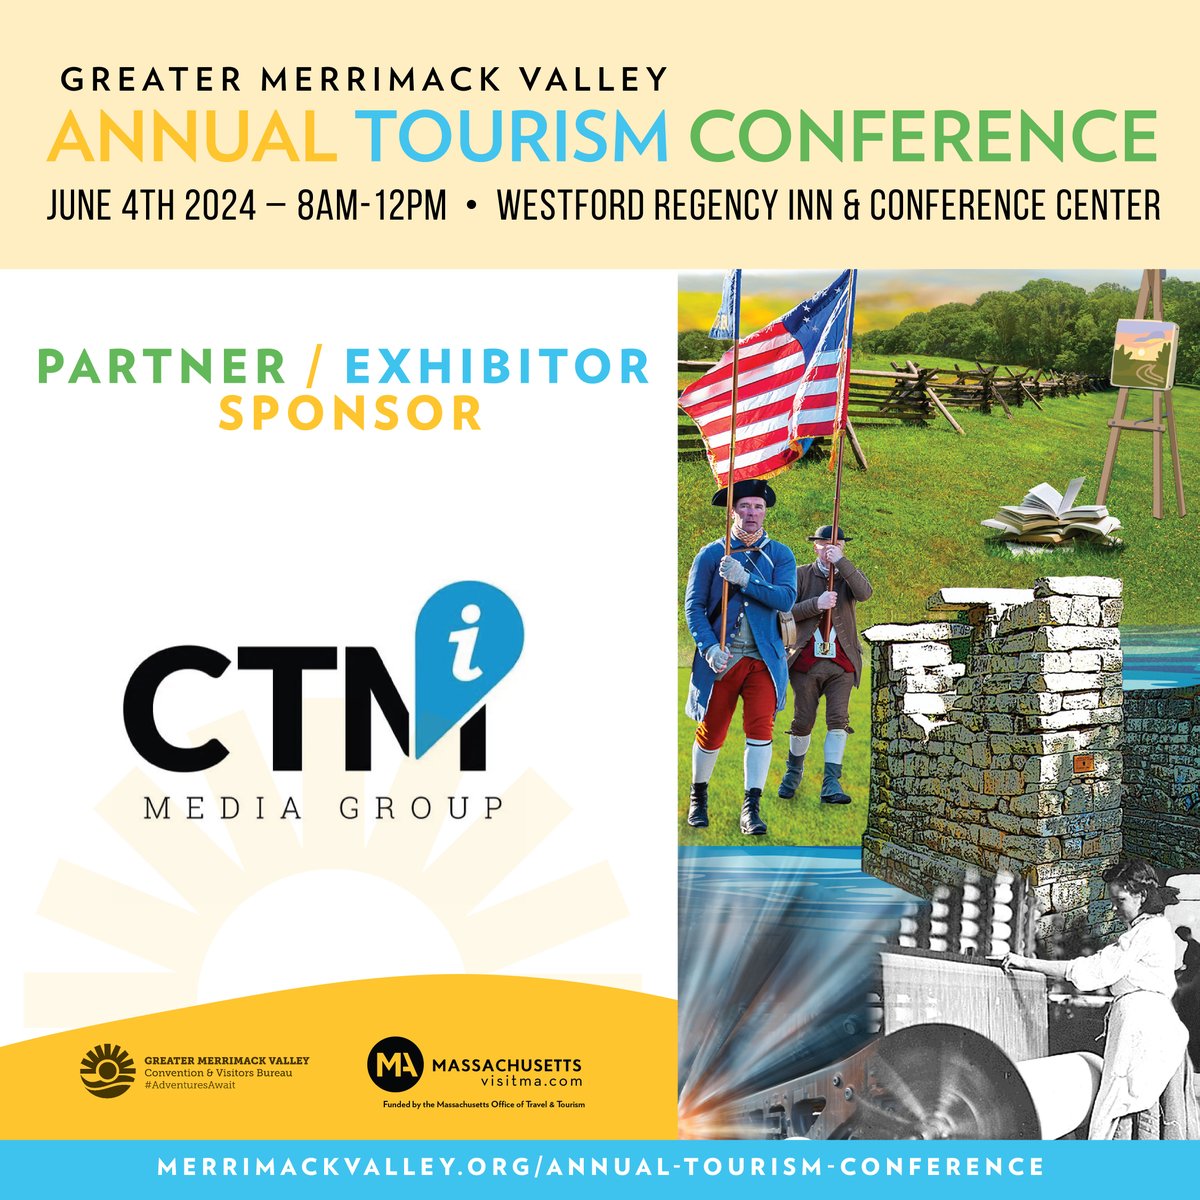 🌟 A big THANK YOU to @CTMMediaGroup for sponsoring the 2024 Annual Tourism Conference! 🌟 Join us on Tuesday, June 4th from 8AM – 12PM at the Westford Regency Inn & Conference Center. Let's explore the future of tourism together! #CTMMedia #TravelIndustry #MerrimackValley